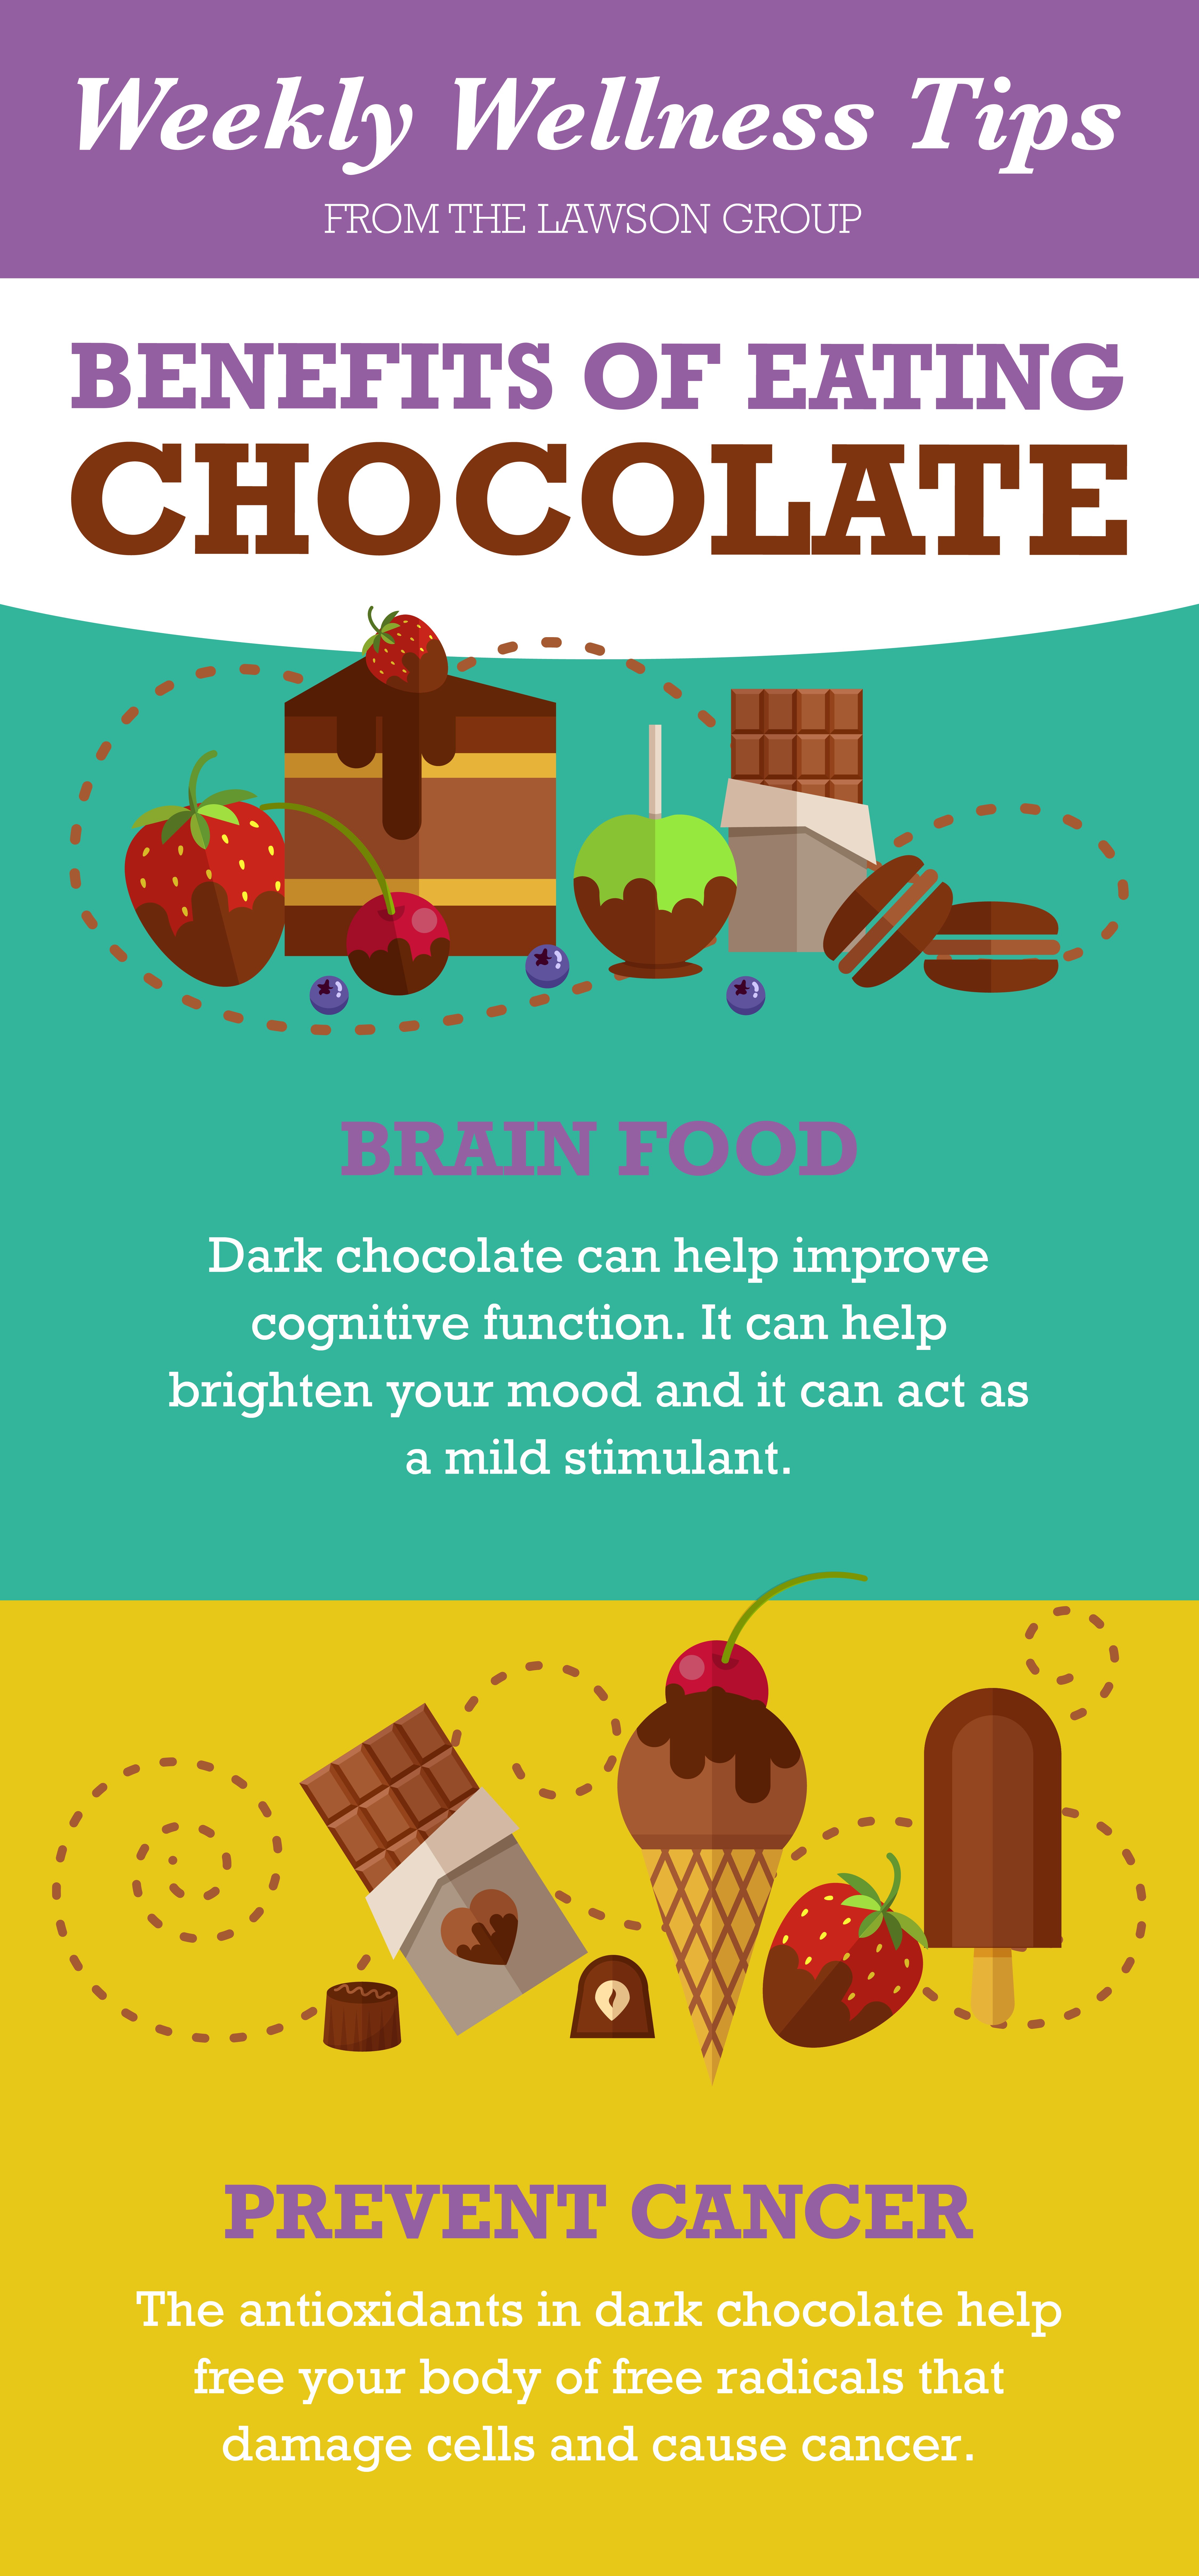 TLG22005 Wellness Tips Benefits of Eating Chocolate Infographic-1080px-01